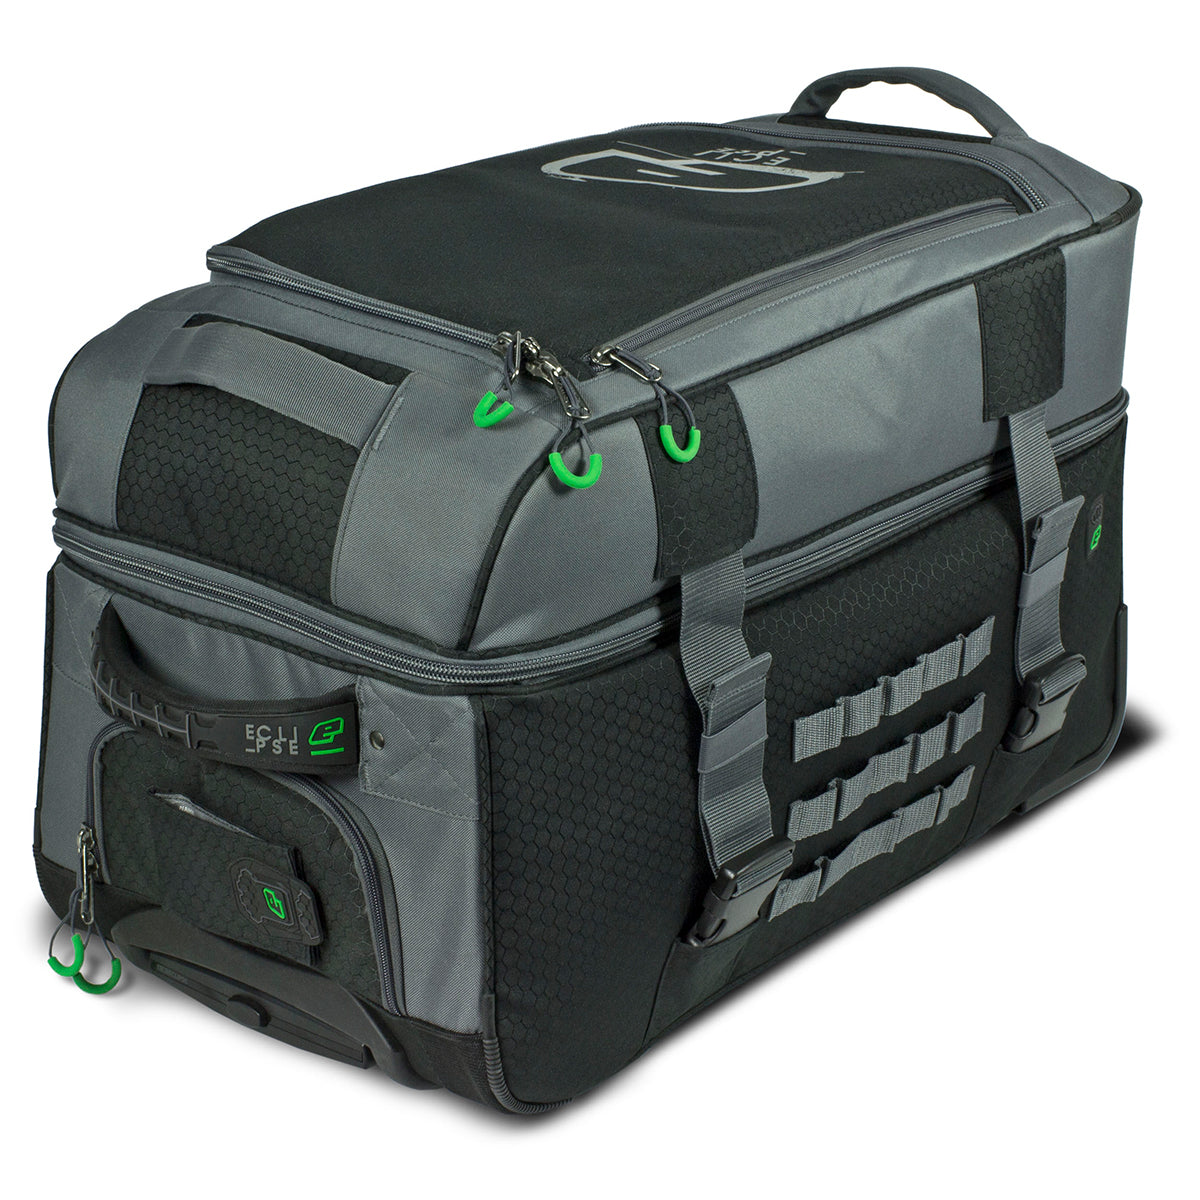 Planet Eclipse GX Split Compact Gearbag - Charcoal